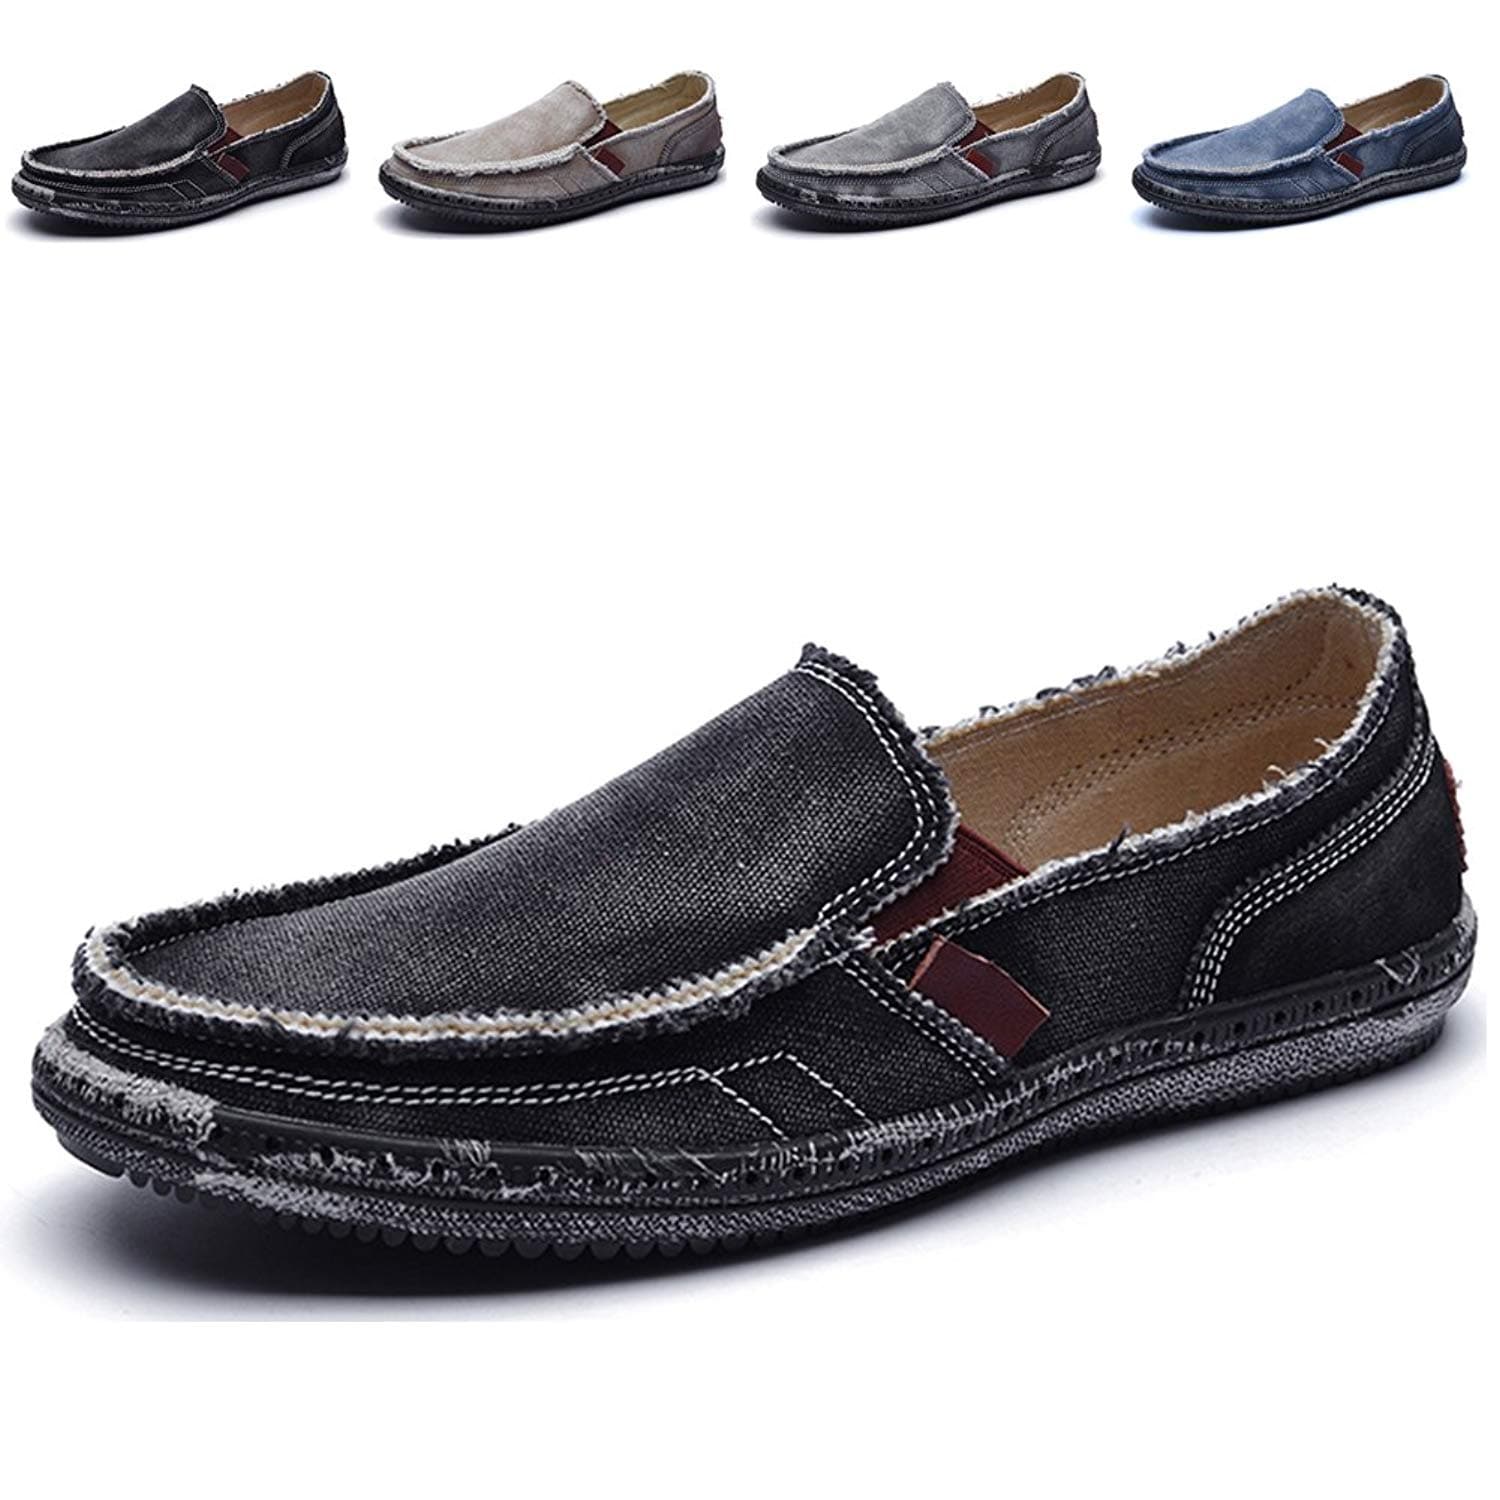 closed shoes for men